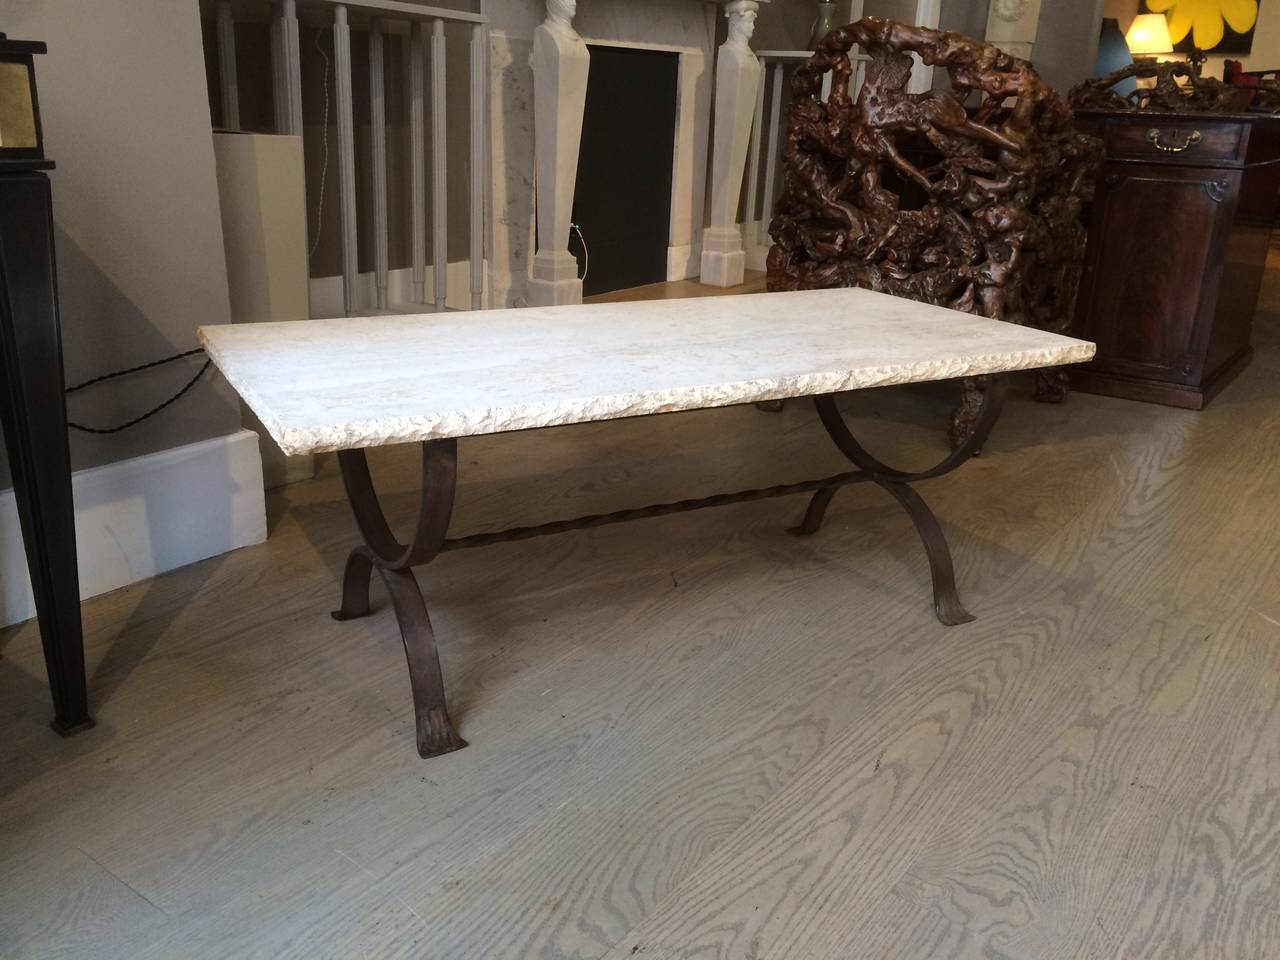 Italian wrought iron coffee or cocktail table with a stunning polished travertine top with roughed edges.